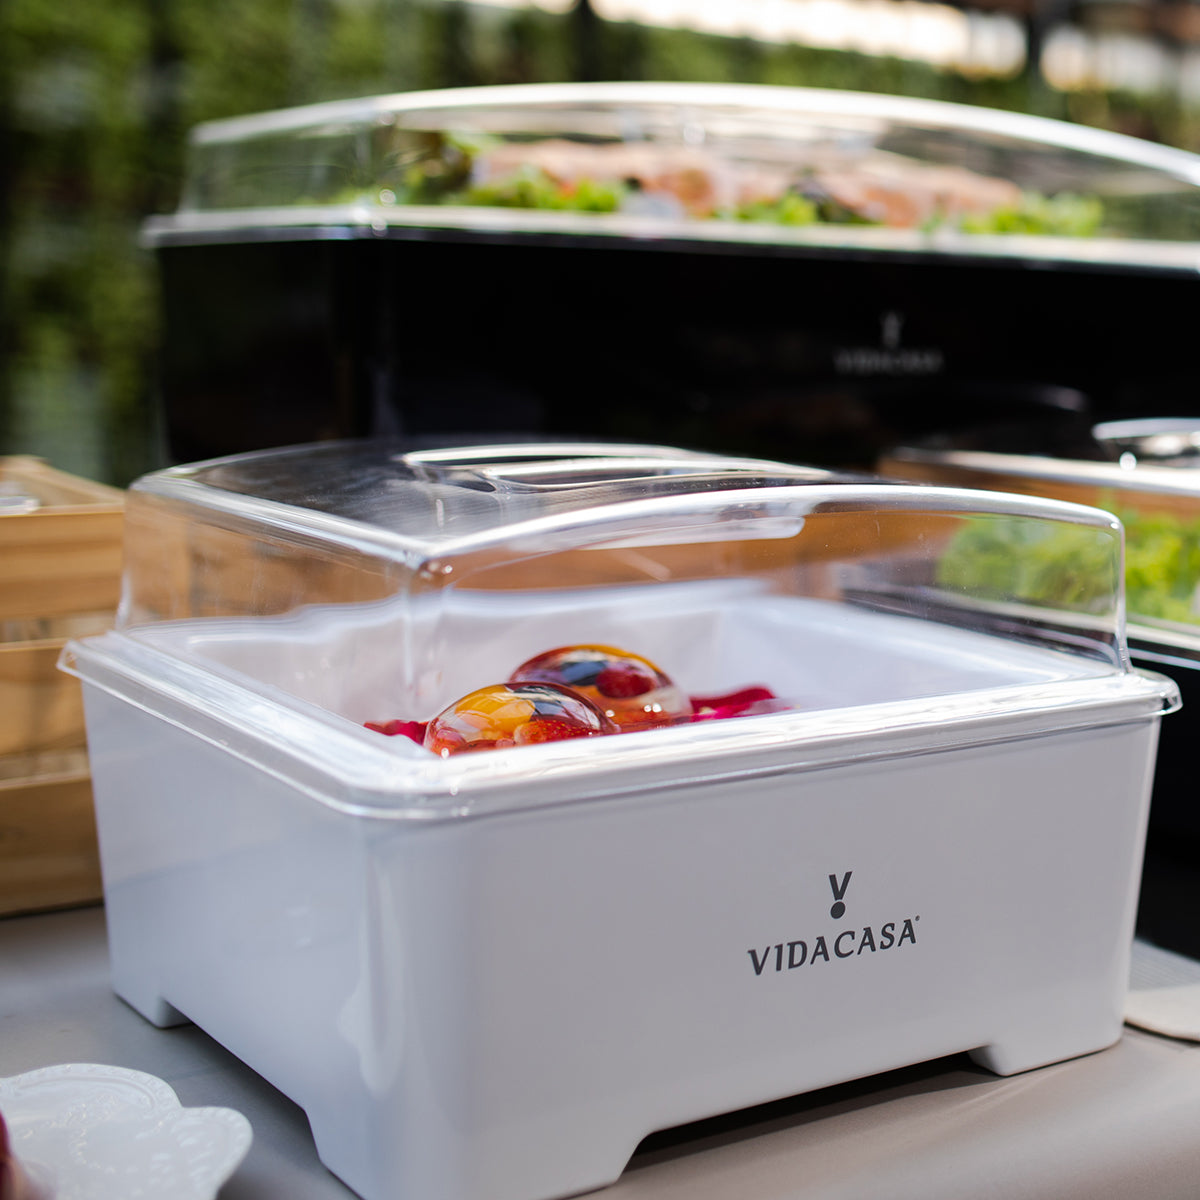 Vidacasa® Classic S305 Square is the world’s first buffetware equipment that can maintain cold foods chilled at 4ºC (39ºF) without ice; Maintain cooked foods hot at 80ºC (176ºF) without dangling cords or chafing fuels.